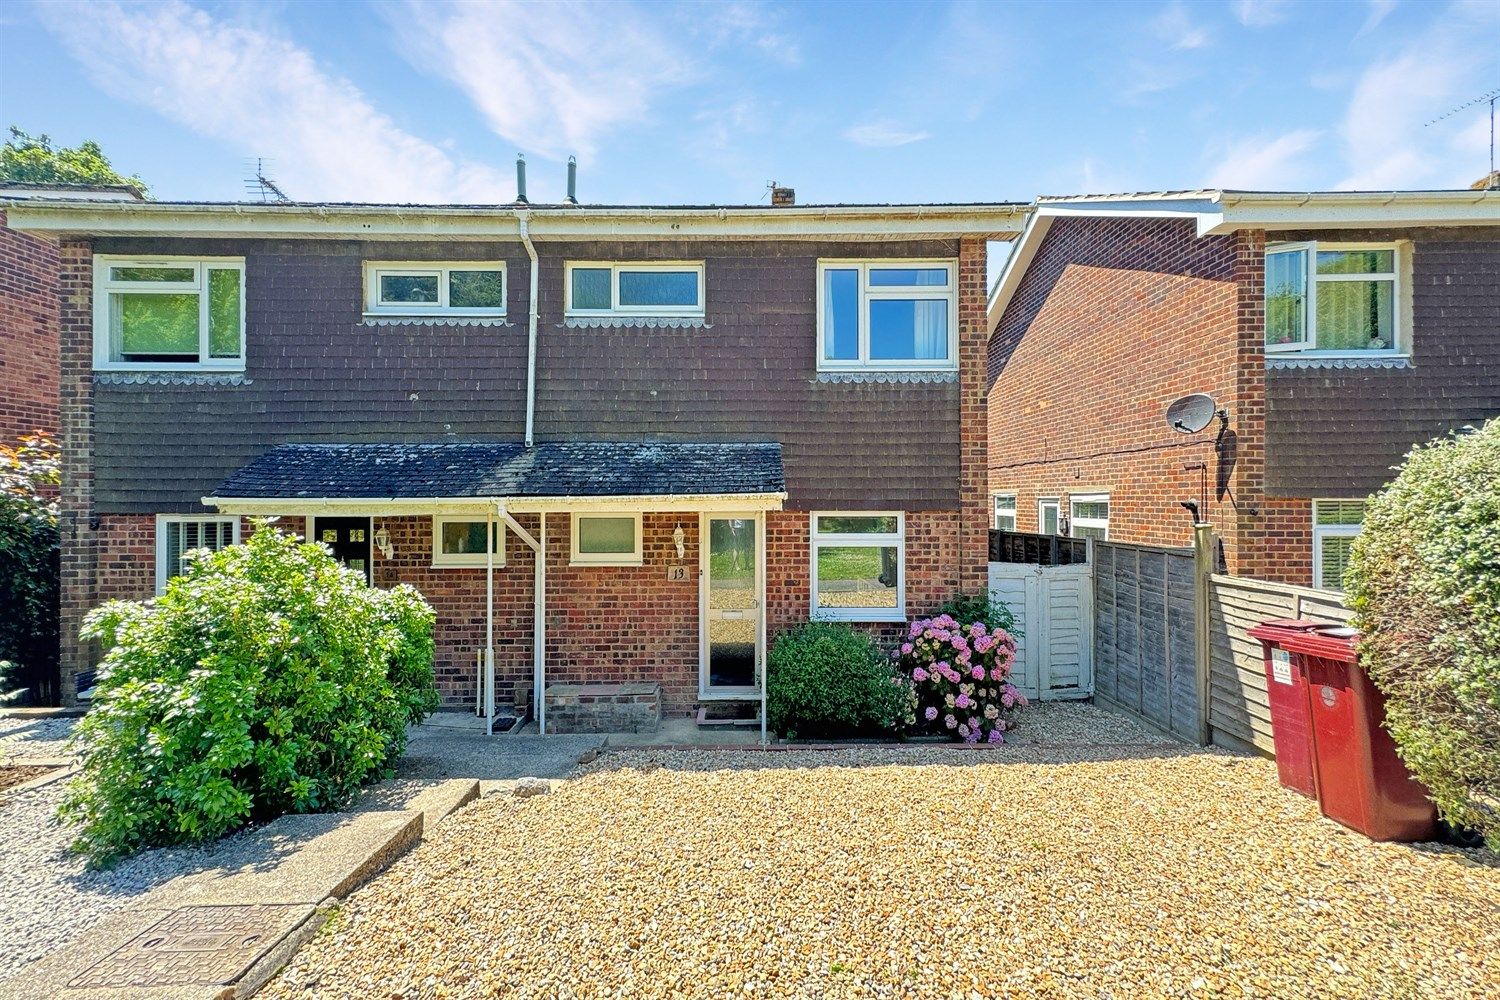 Tangmere, Chichester, West Sussex, PO20 2HG